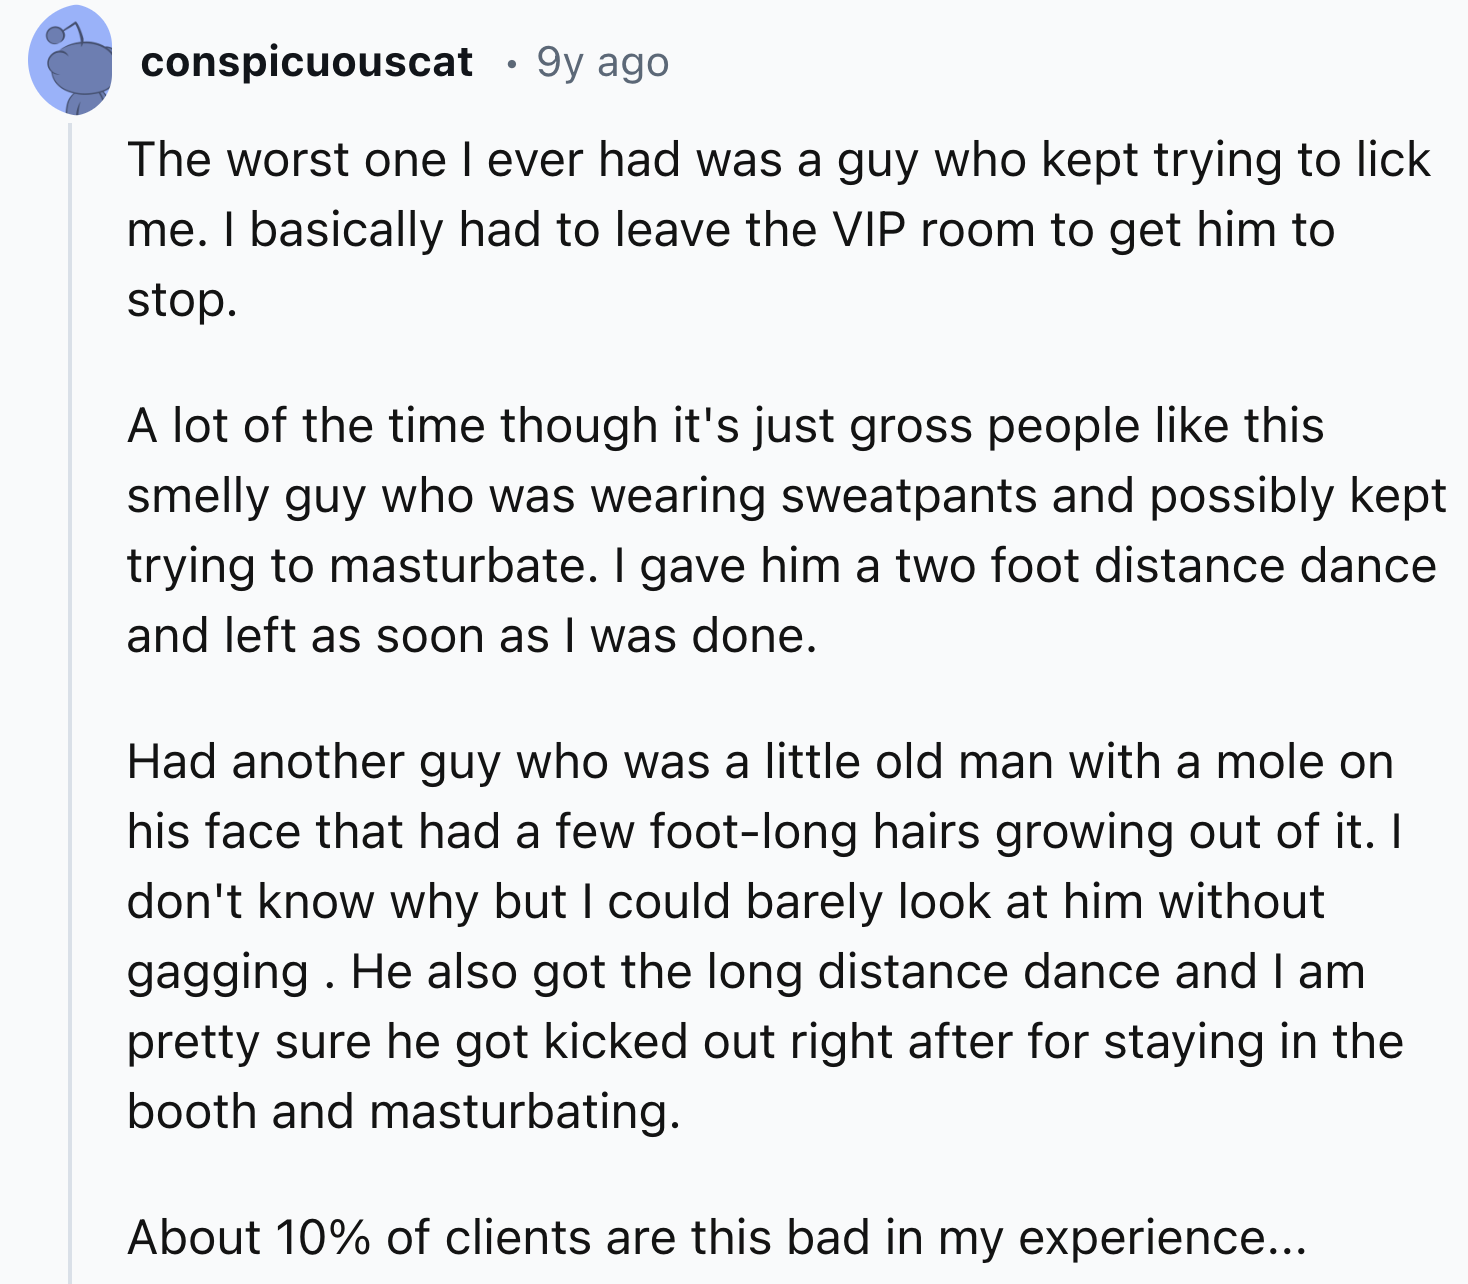 document - conspicuouscat . 9y ago The worst one I ever had was a guy who kept trying to lick me. I basically had to leave the Vip room to get him to stop. A lot of the time though it's just gross people this smelly guy who was wearing sweatpants and poss